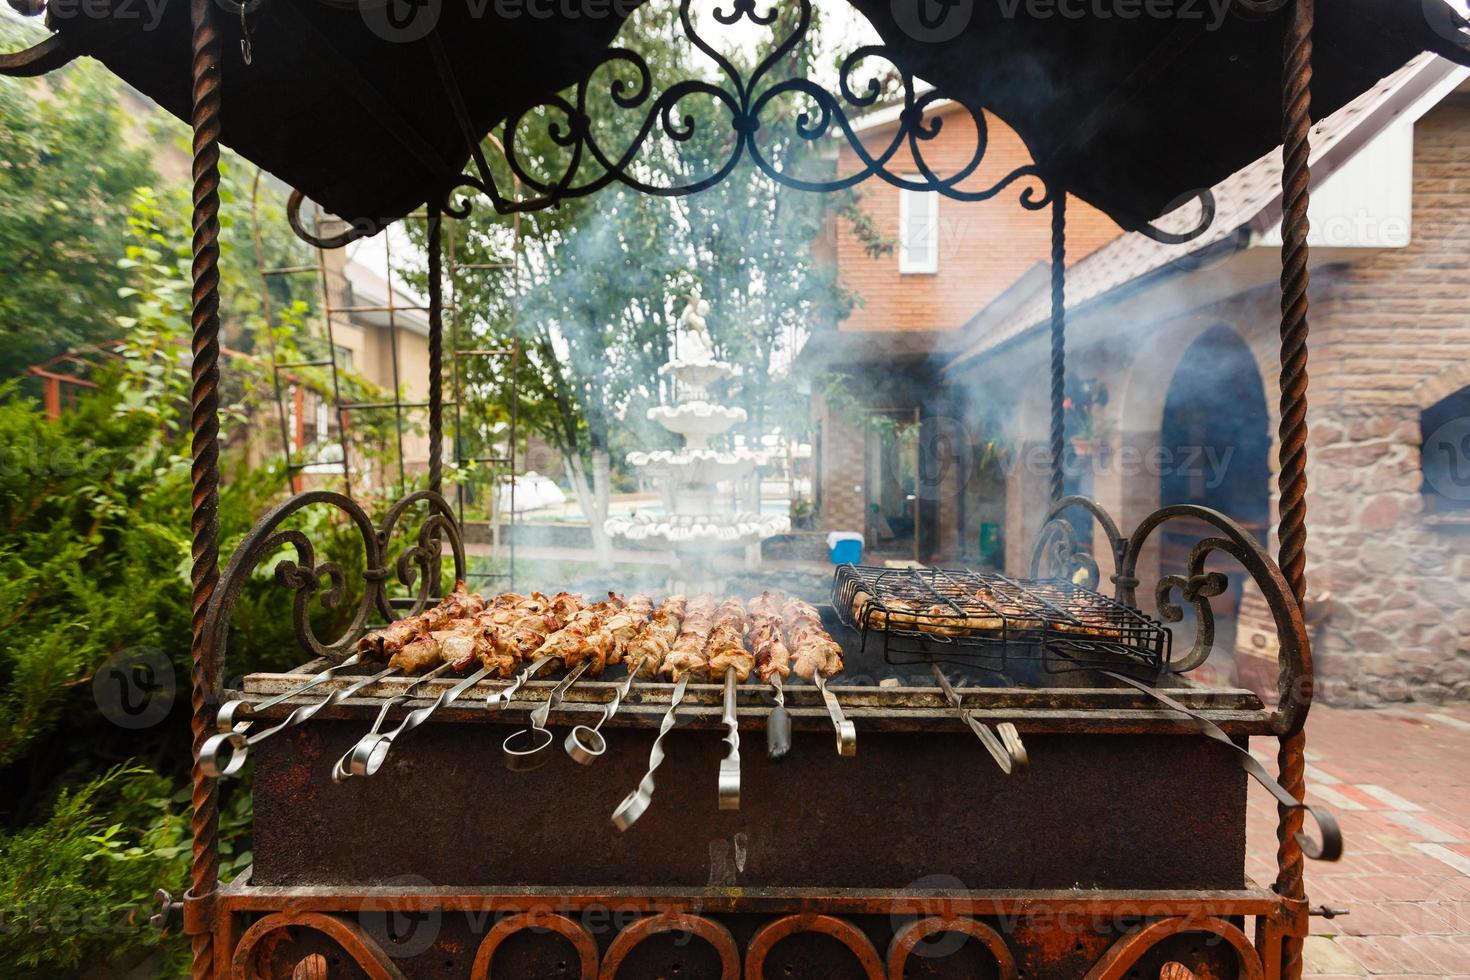 Grilling meat skewers and chicken on natural charcoal barbecue grill. Preparing a big steak on natural firewood BBQ in outside fireplace. photo